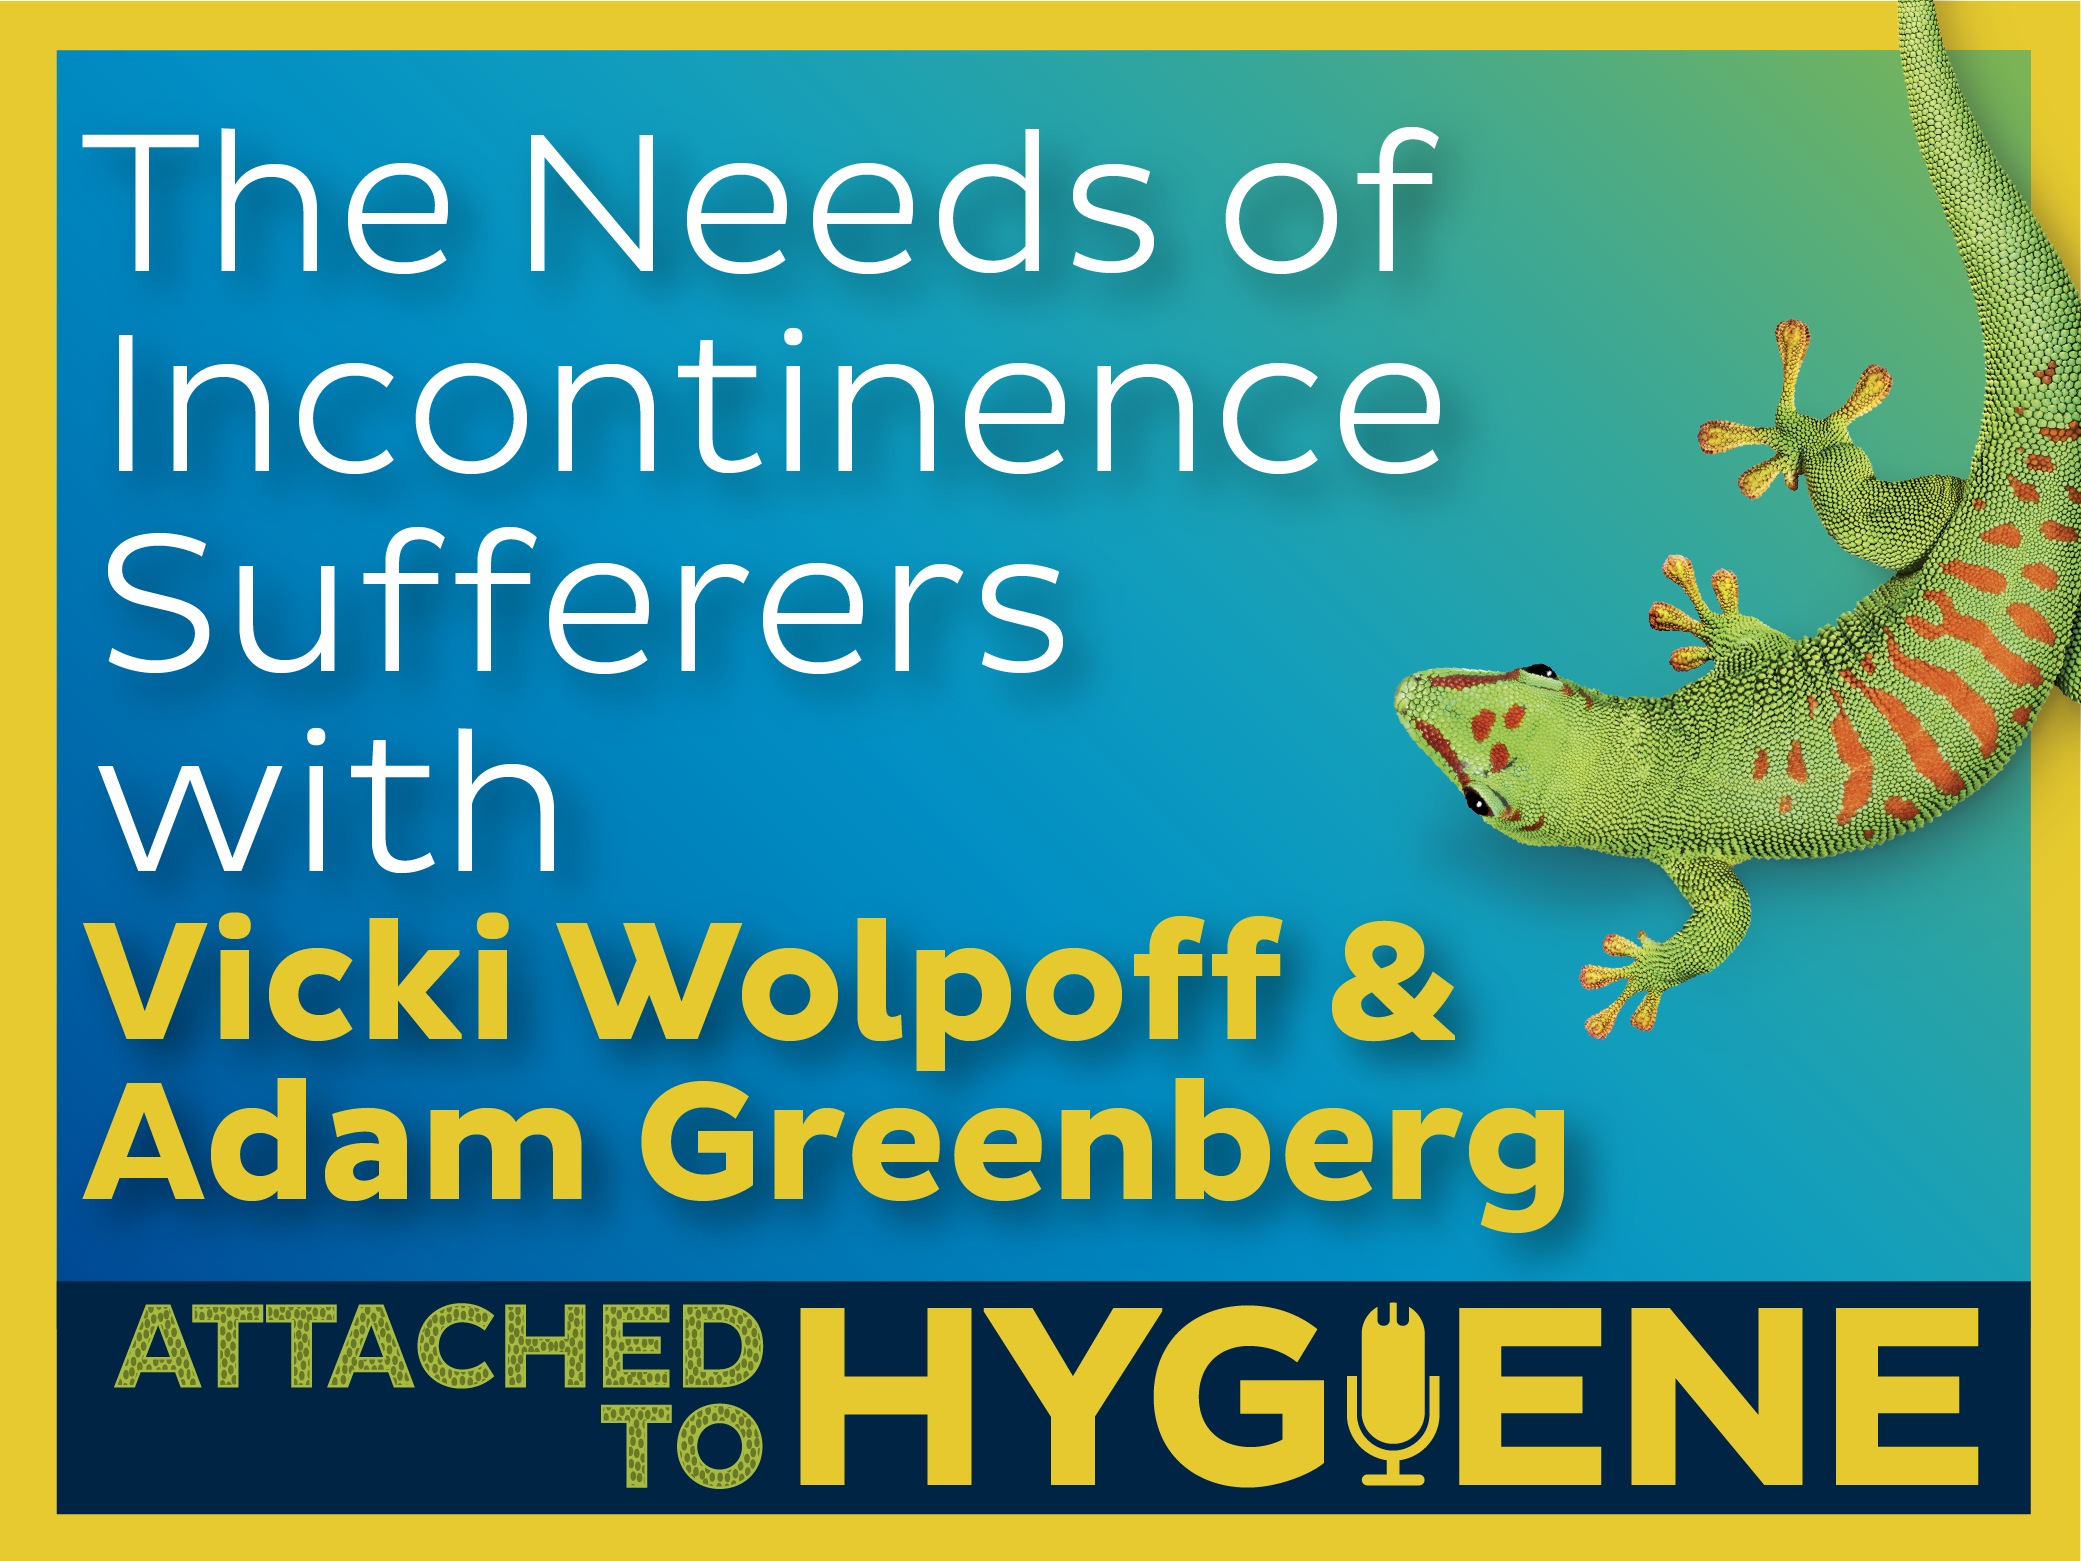 The-Needs-of-Incontinence-Sufferers-with-Vicki-Wolpoff-and-Adam-Greenberg